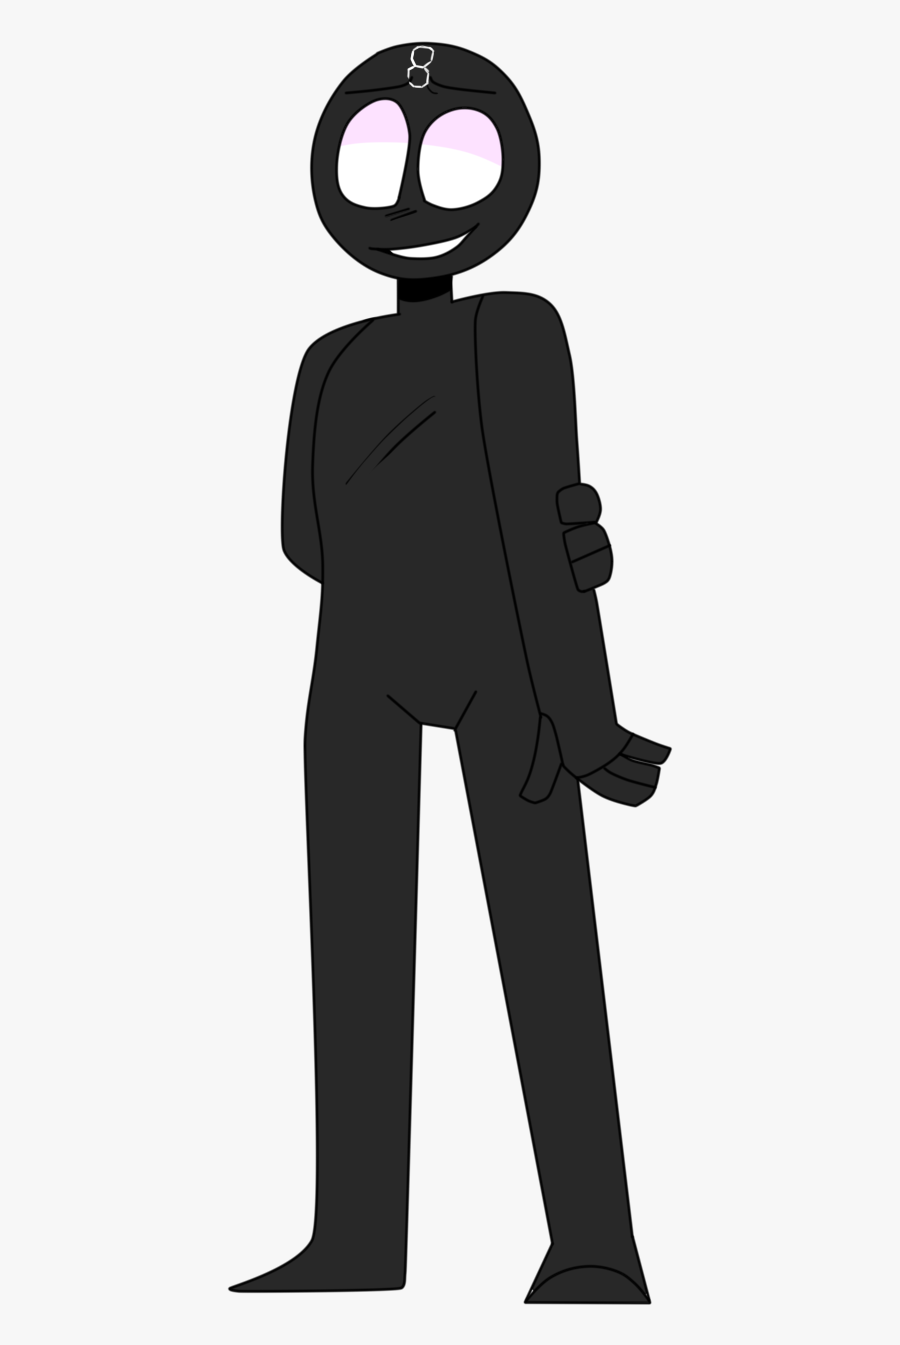 Current - 8 Ball As A Character, Transparent Clipart